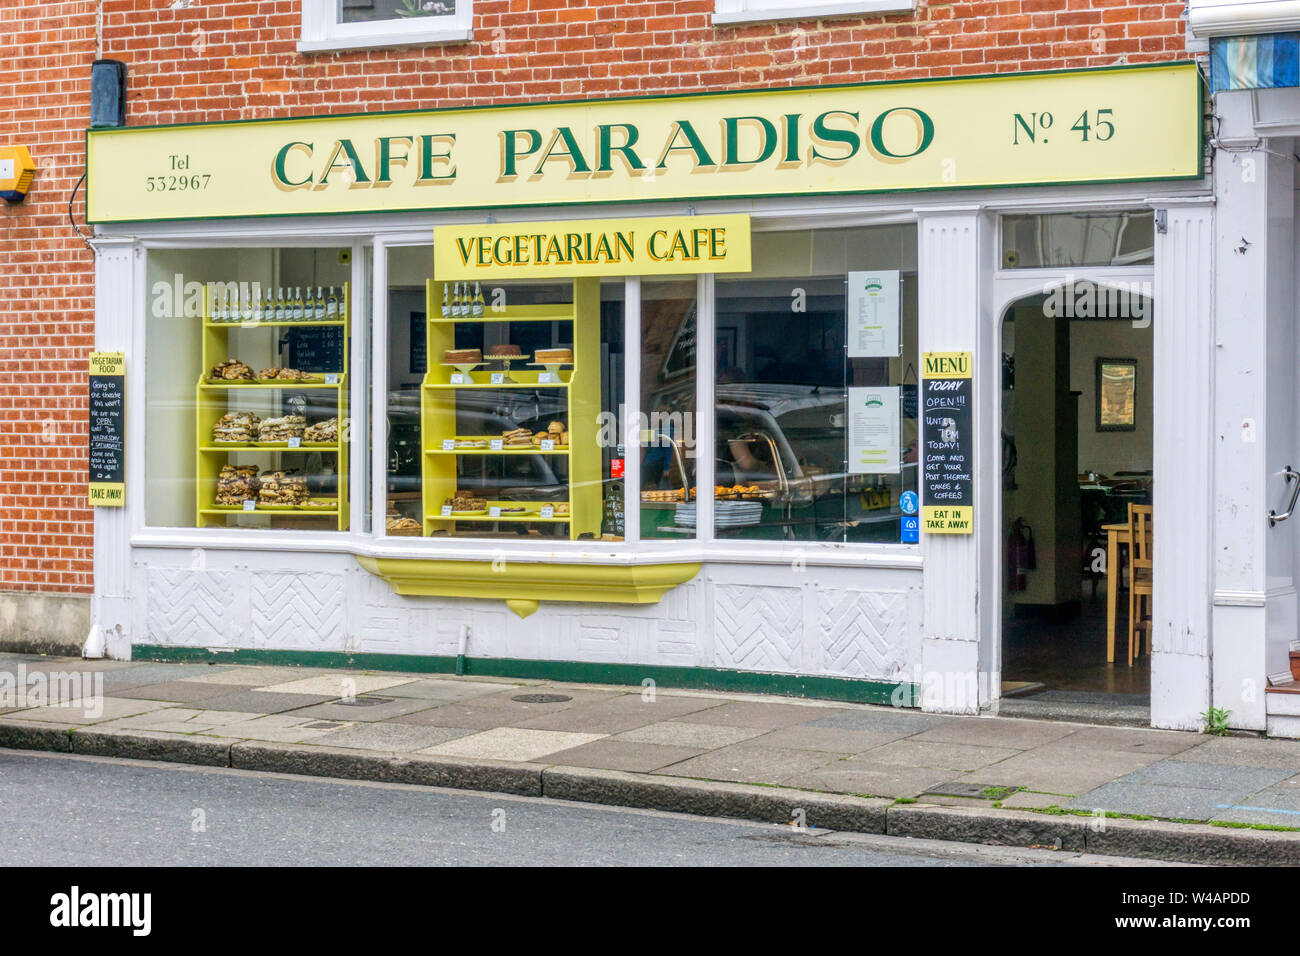 The Cafe Paradiso vegetarian cafe in North Street, Chichester. Stock Photo